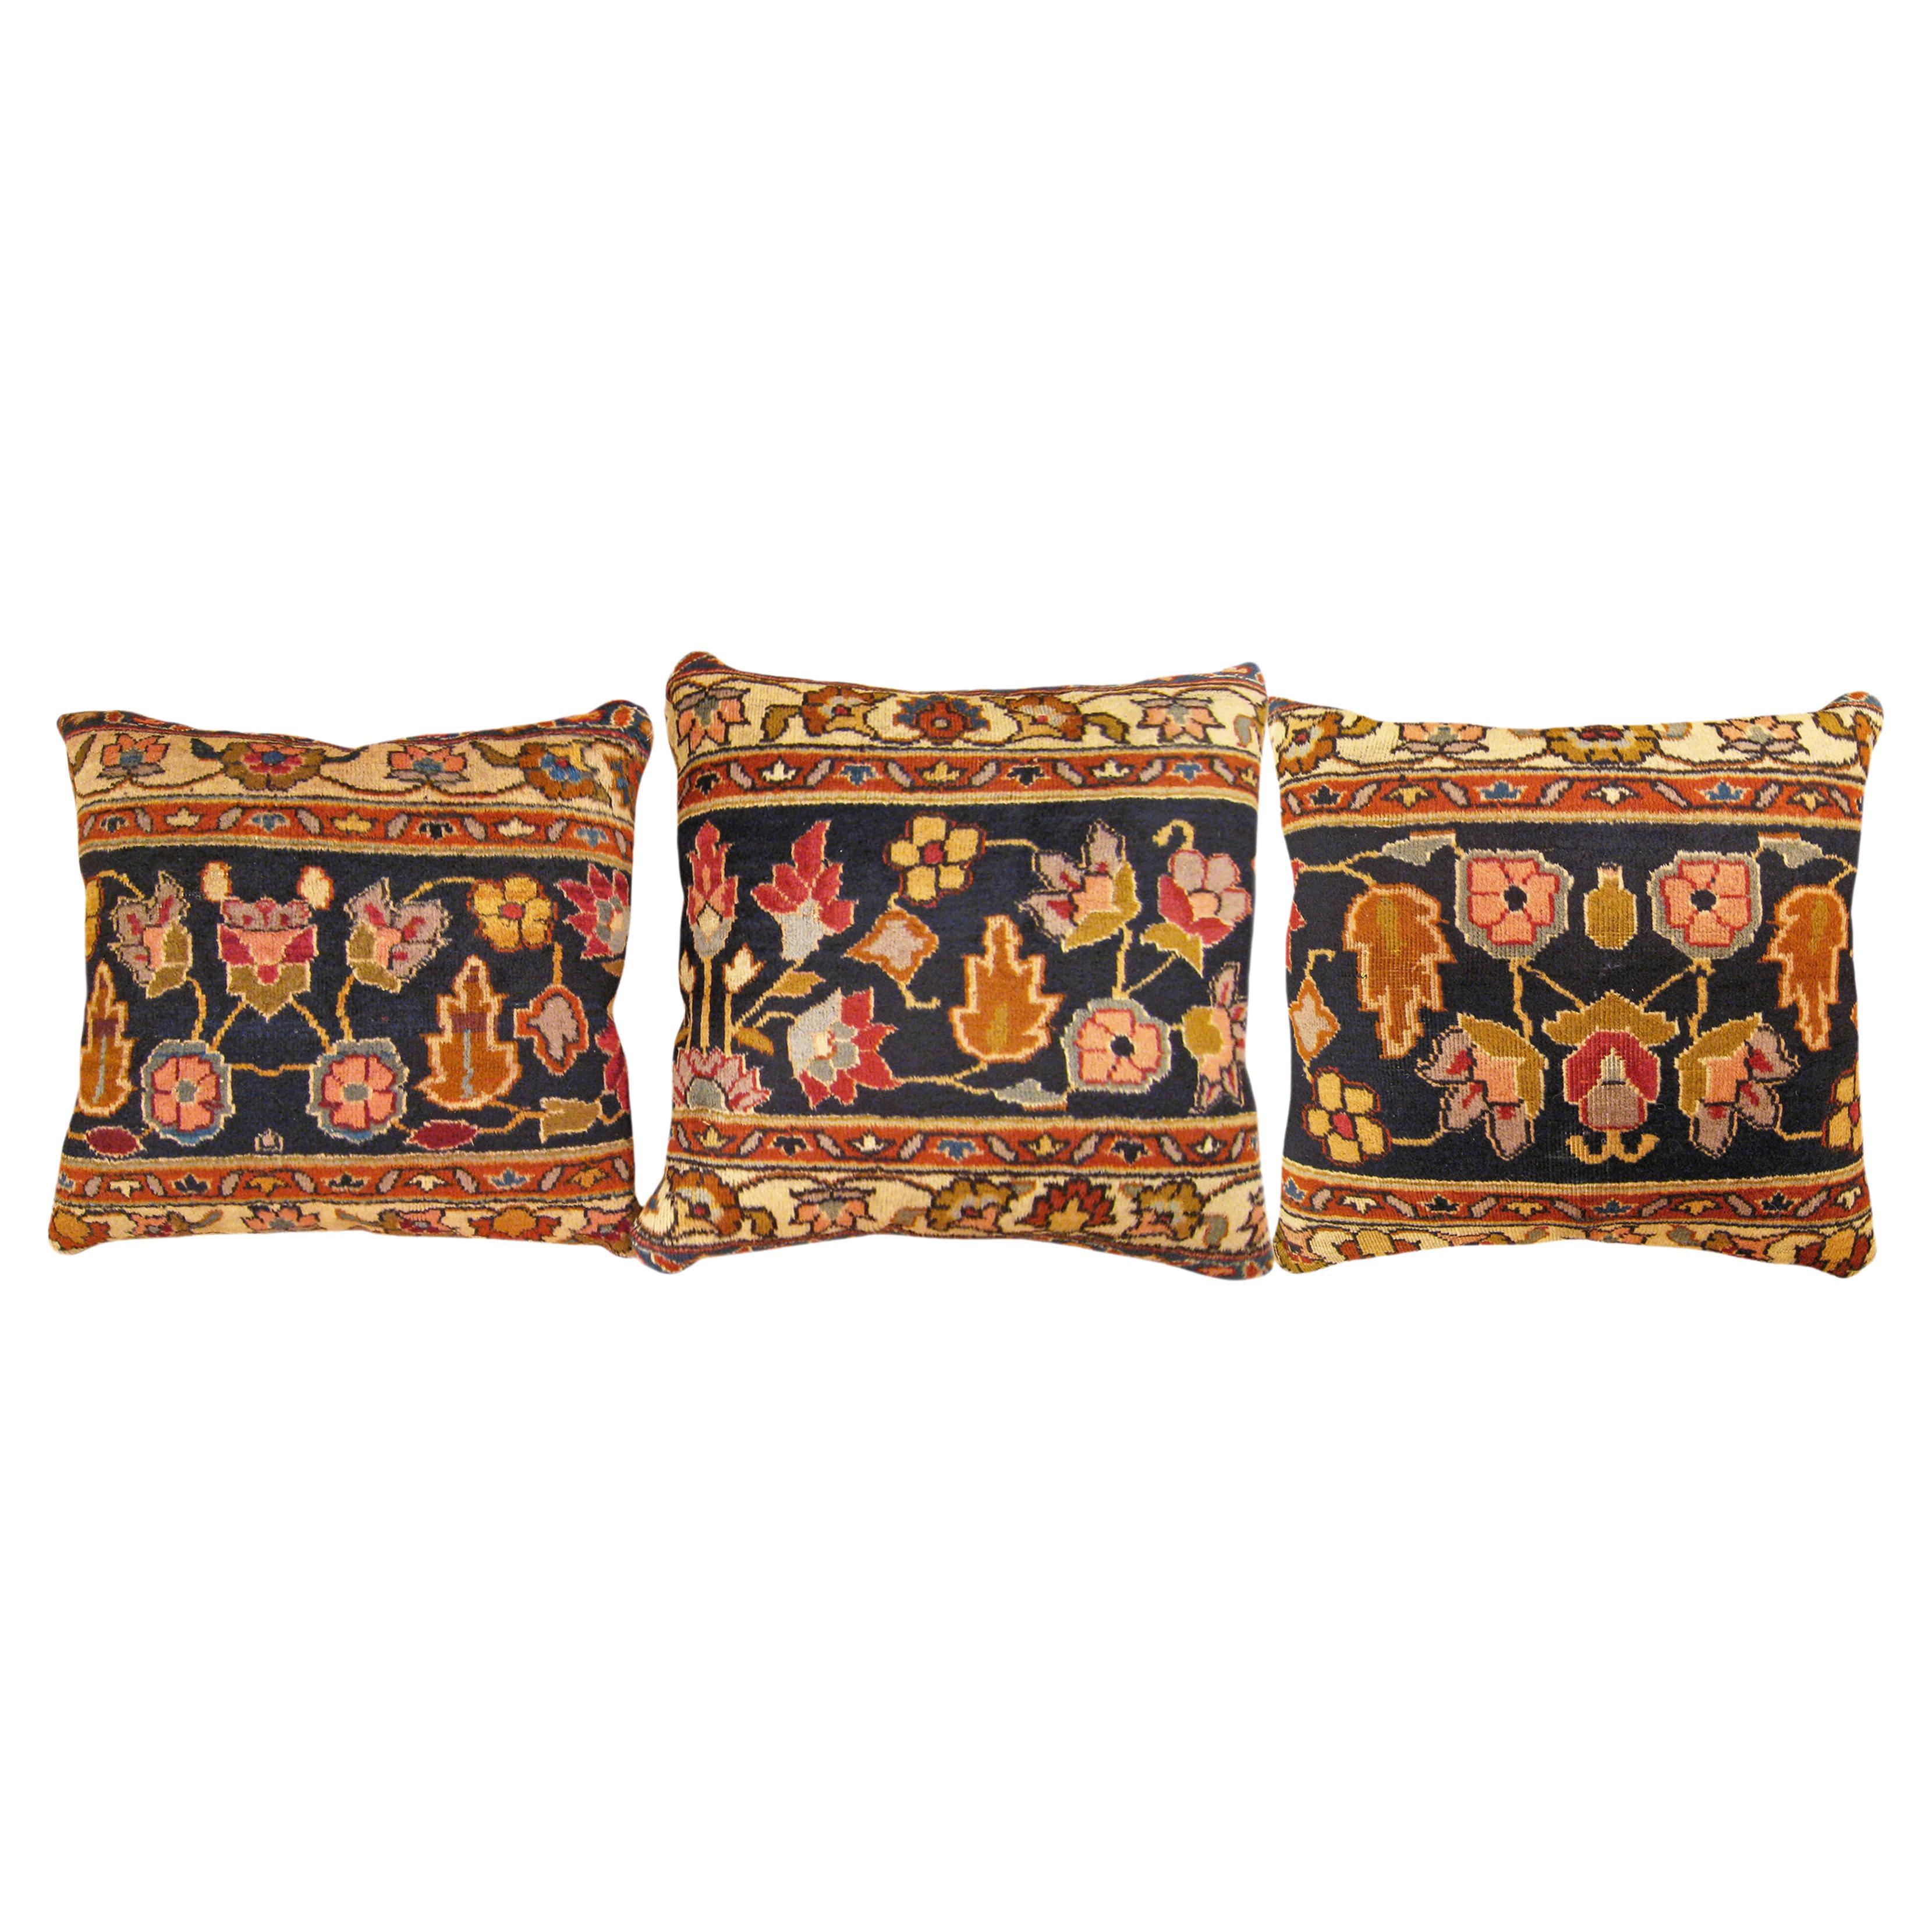 Set of Decorative Antique Indian Agra Rug Pillows with Floral Elements